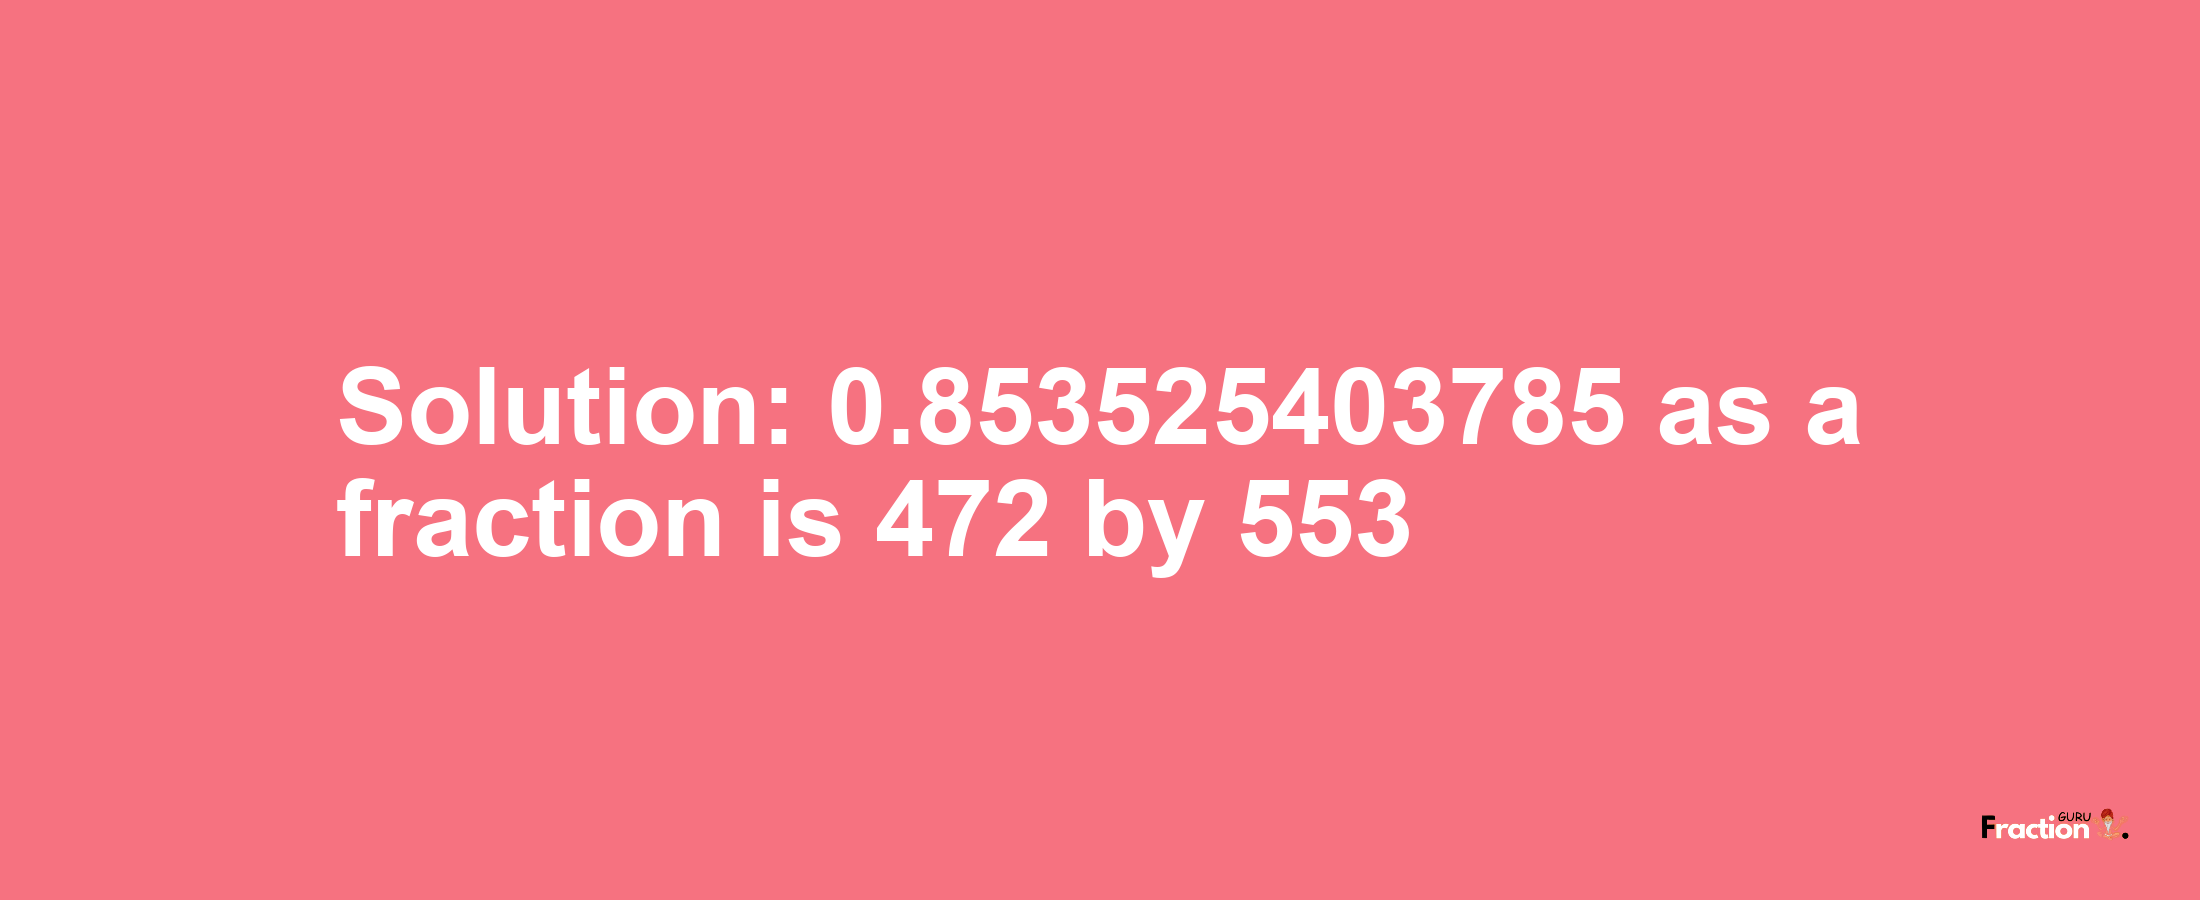 Solution:0.853525403785 as a fraction is 472/553